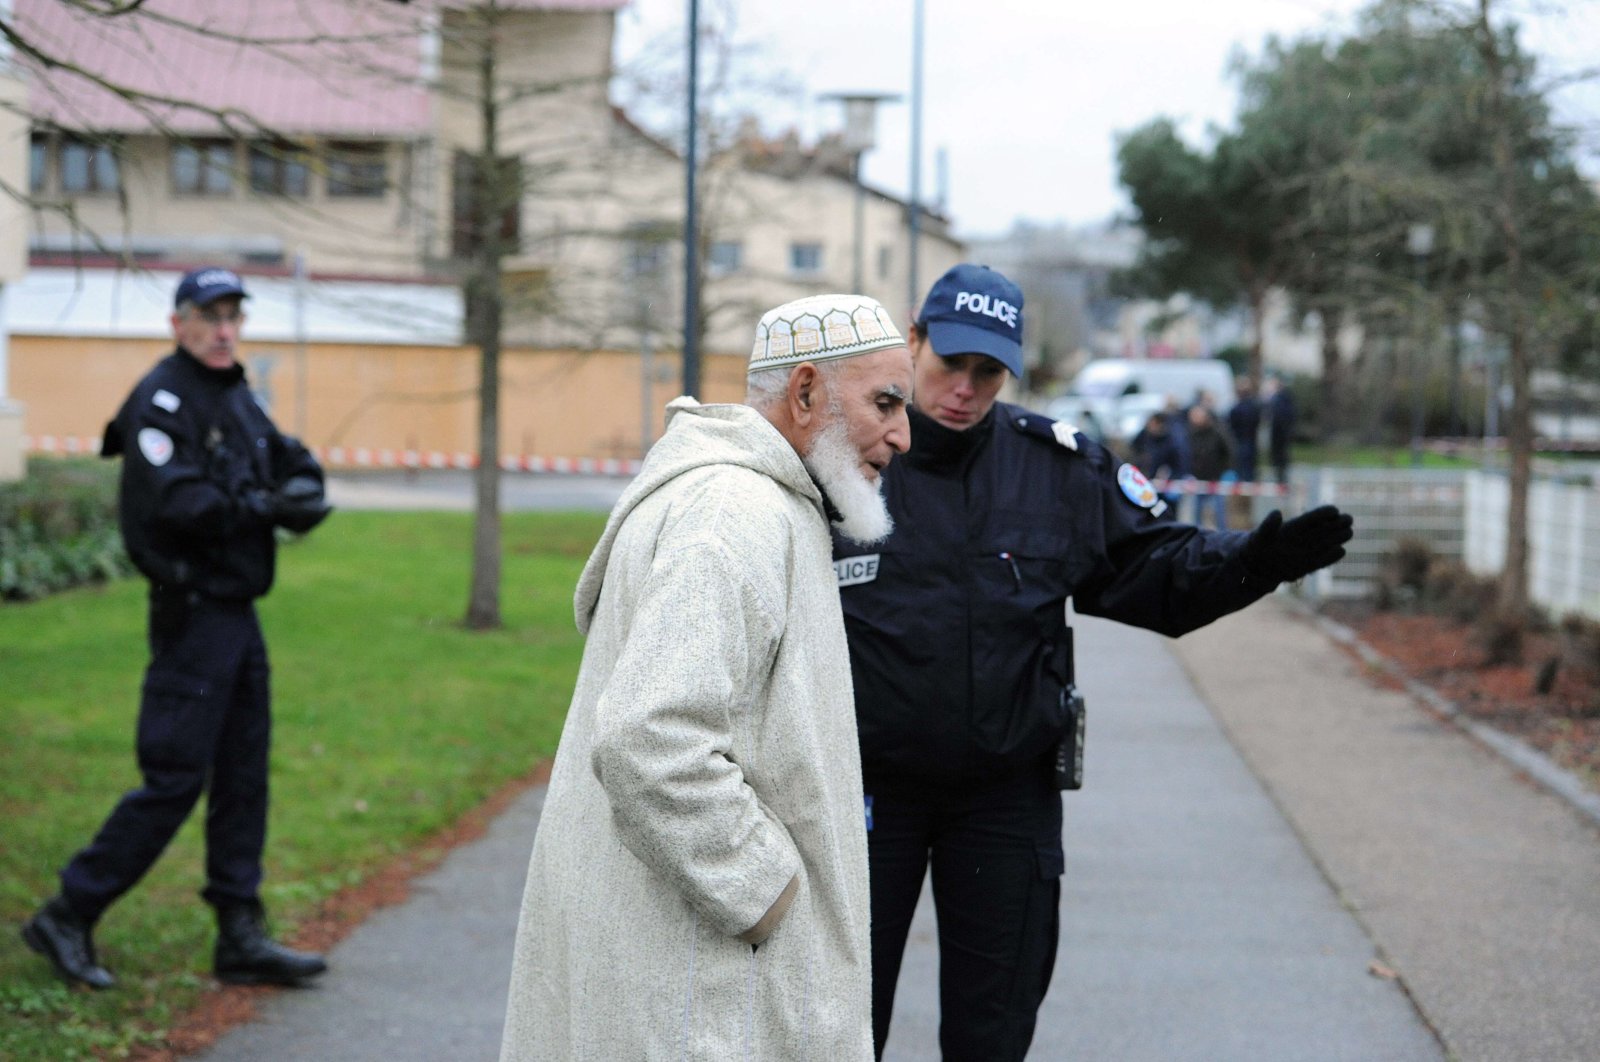 A police officer directs a man away as members of the French technical and scientific police work at the site near a mosque in the Sablons neighborhood of Le Mans, western France, Jan. 8, 2015. (AFP Photo)